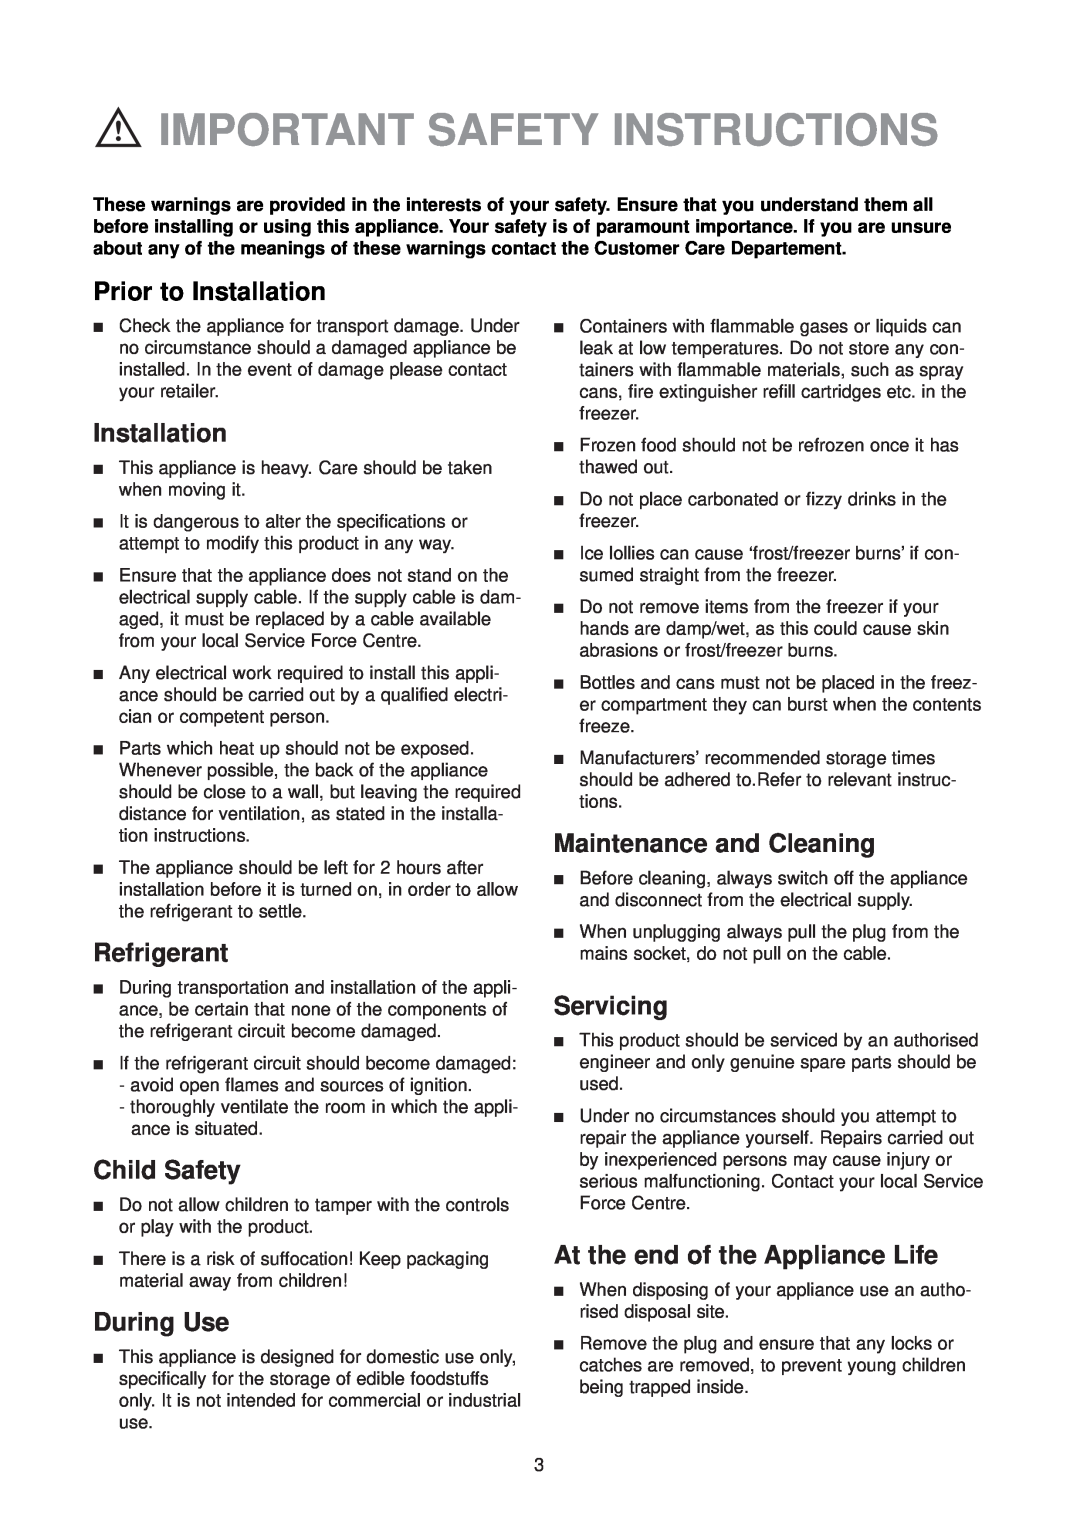 Zanussi ZV 40 R Important Safety Instructions, Prior to Installation, Refrigerant, Child Safety, During Use, Servicing 